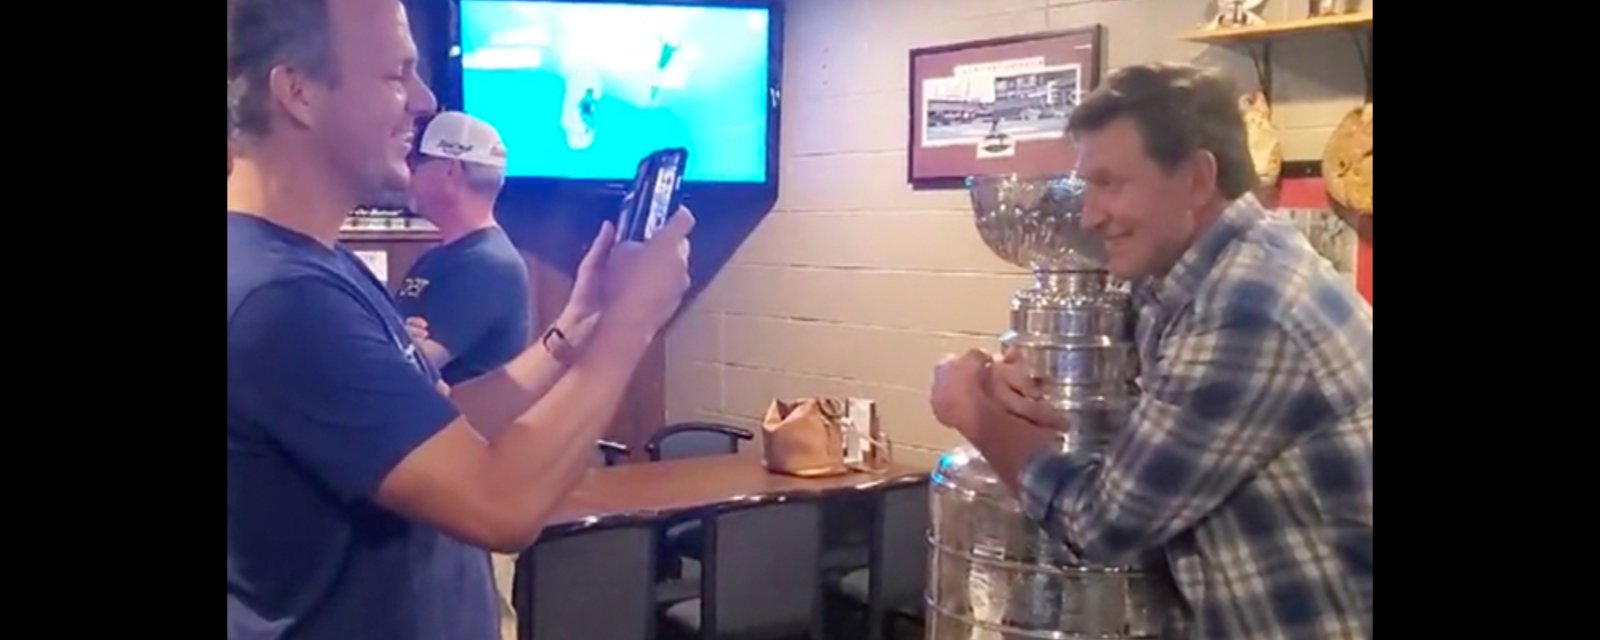 Gretzky is reunited with the Stanley Cup at Lightning's party